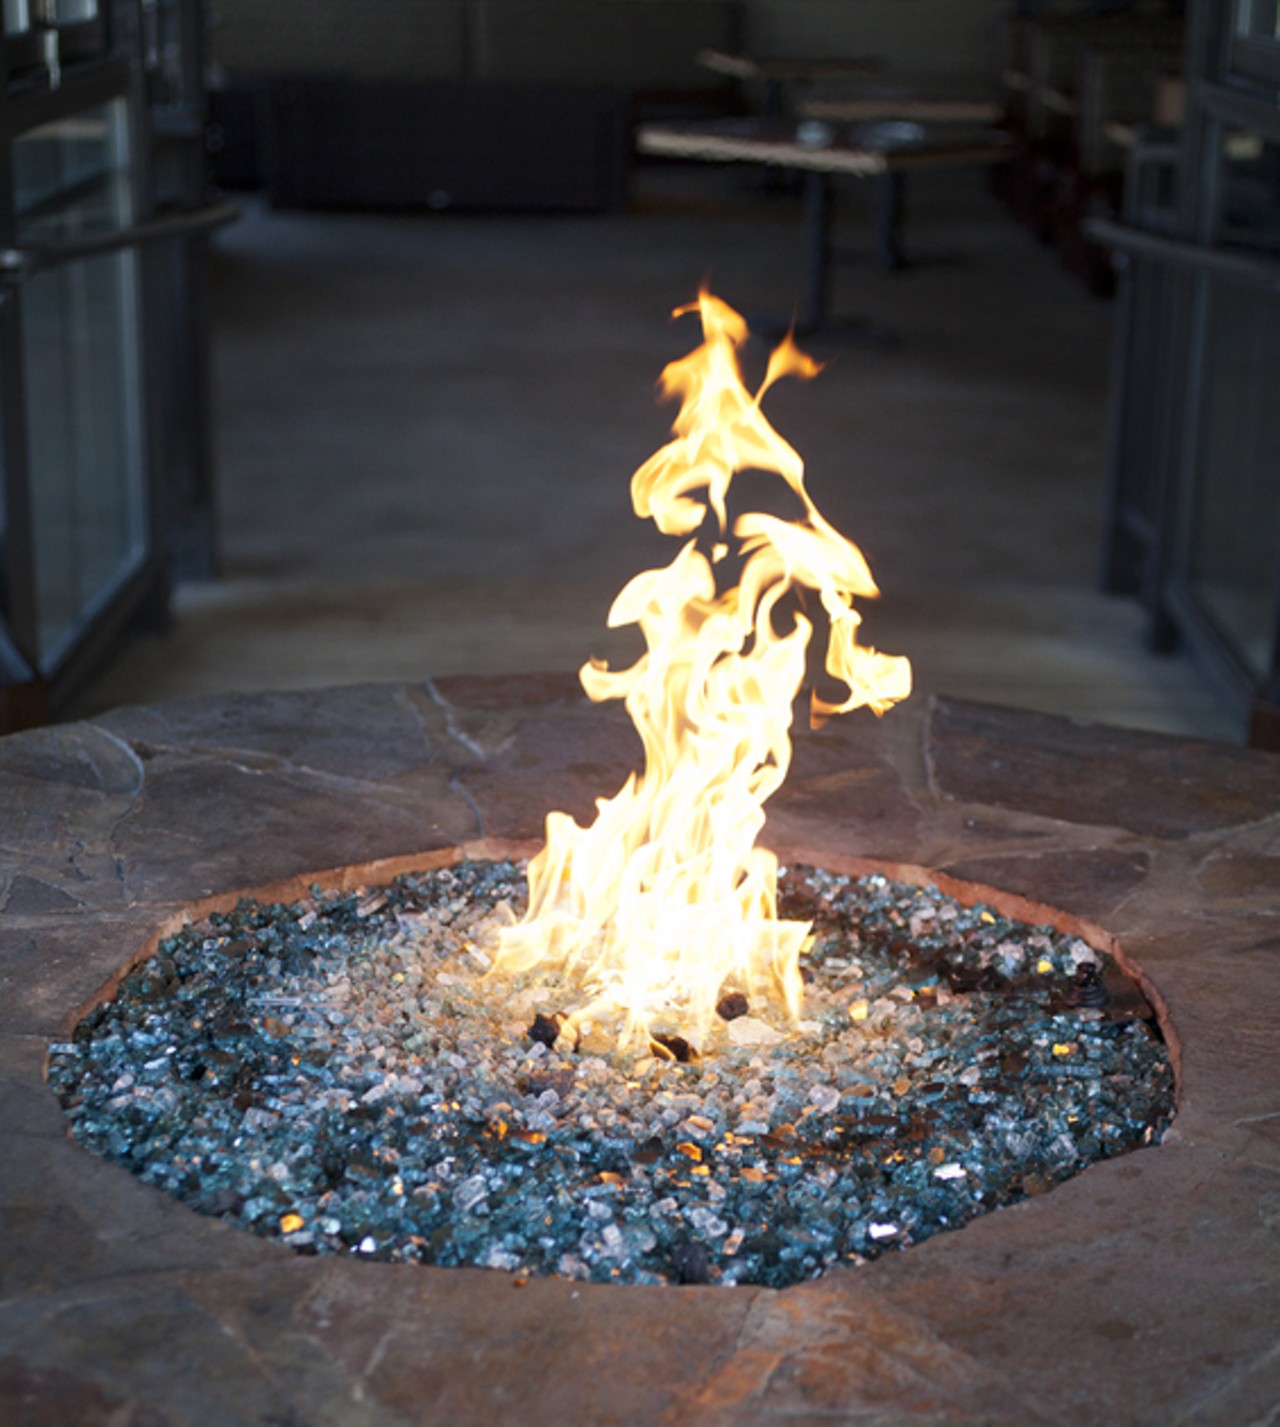 The fire-pit adds a rustic feel